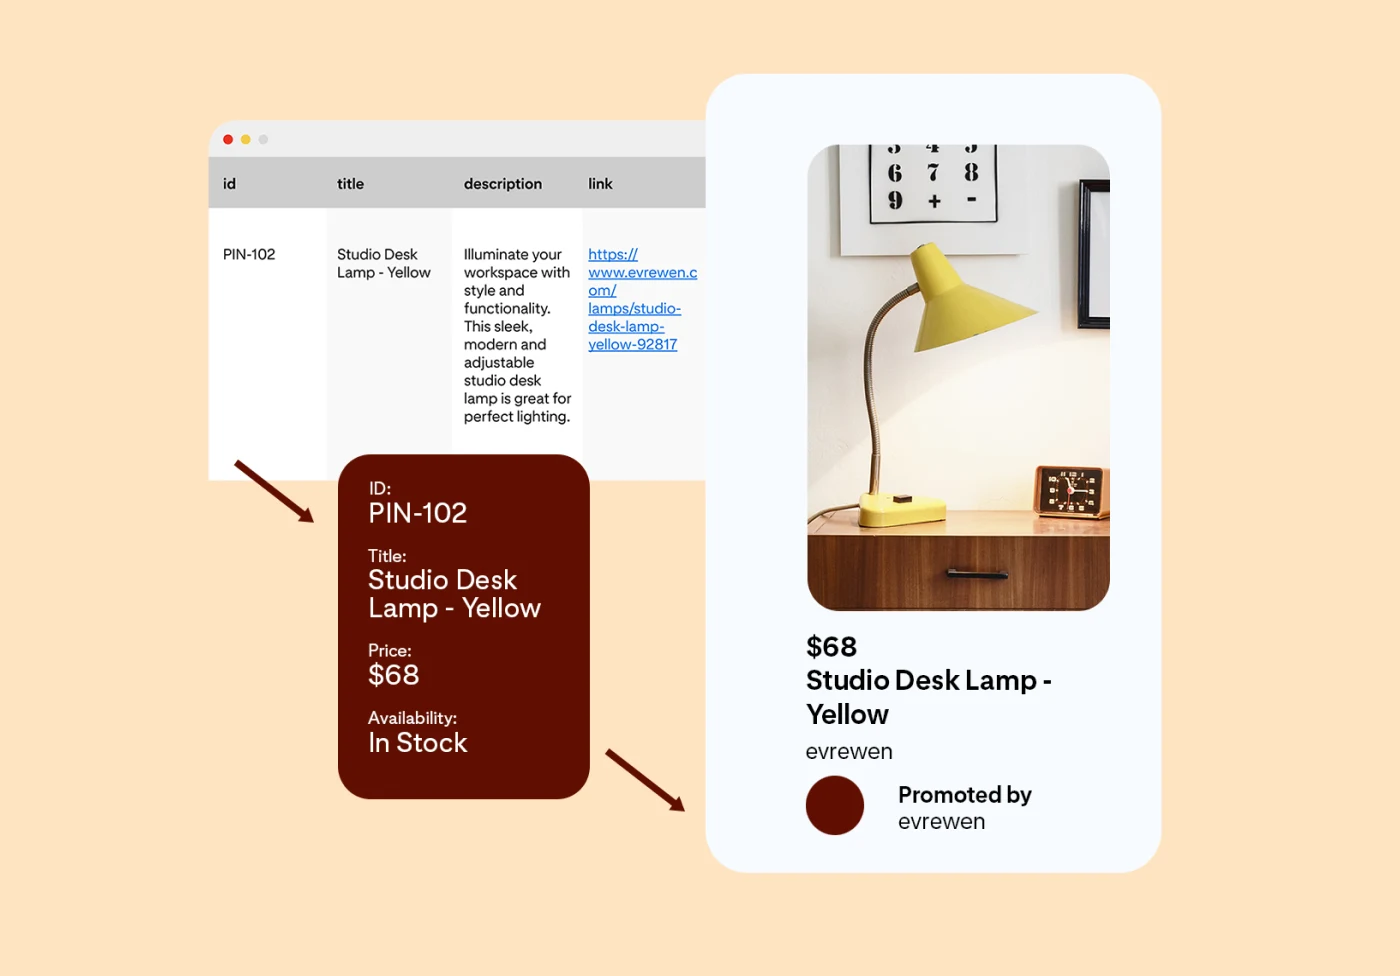 Three images depicting the product catalog upload process: a spreadsheet with a single item, yellow Studio Desk Lamp, detailed information extracted from the spreadsheet, and the resulting advertisement promoting the yellow lamp by evrewen.